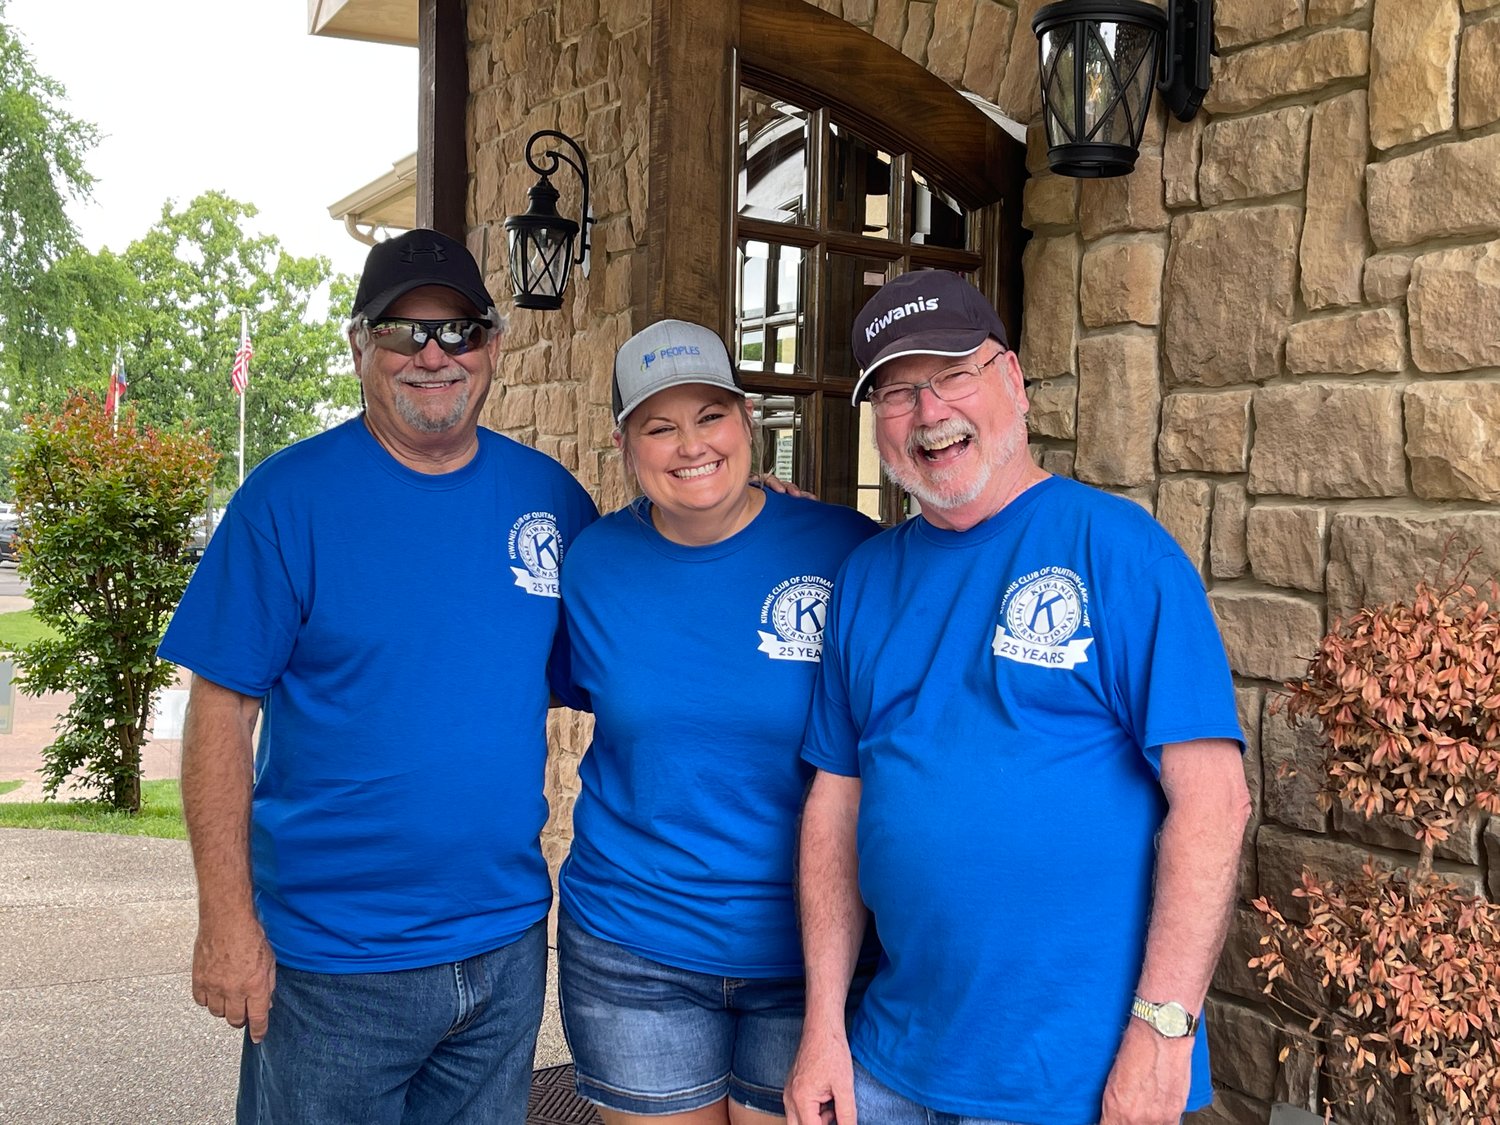 Quitman-Lake Fork Kiwanis Club members working the recent golf tournament include, from left, Larry Lorton, Rhandi Taylor and JR Evans. (Courtesy photo)